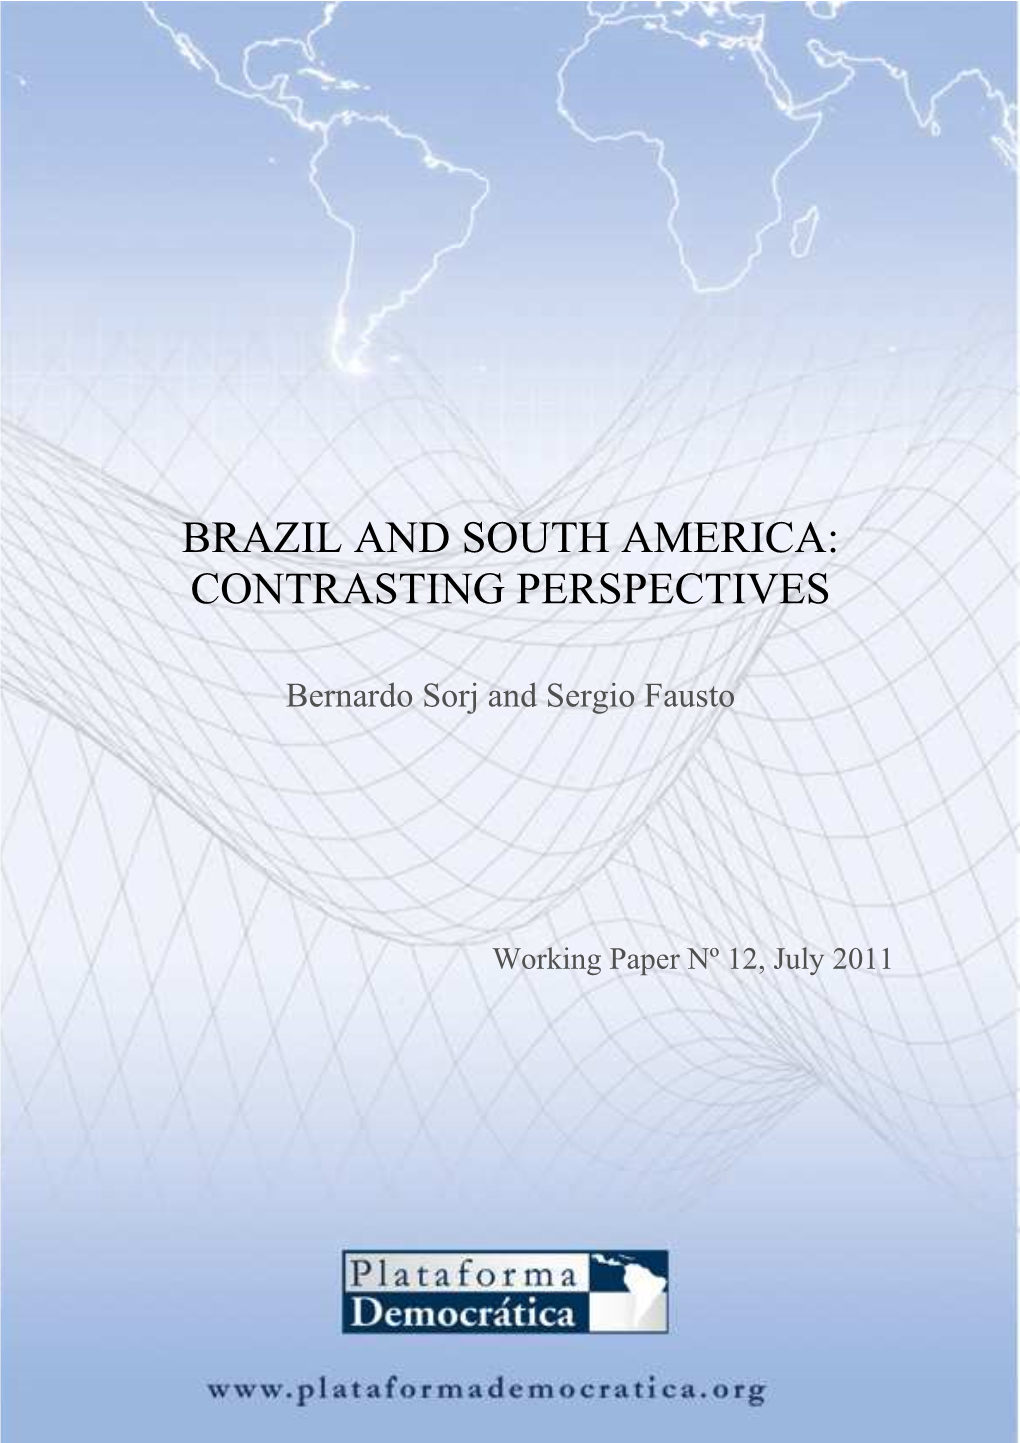 Brazil and South America: Contrasting Perspectives